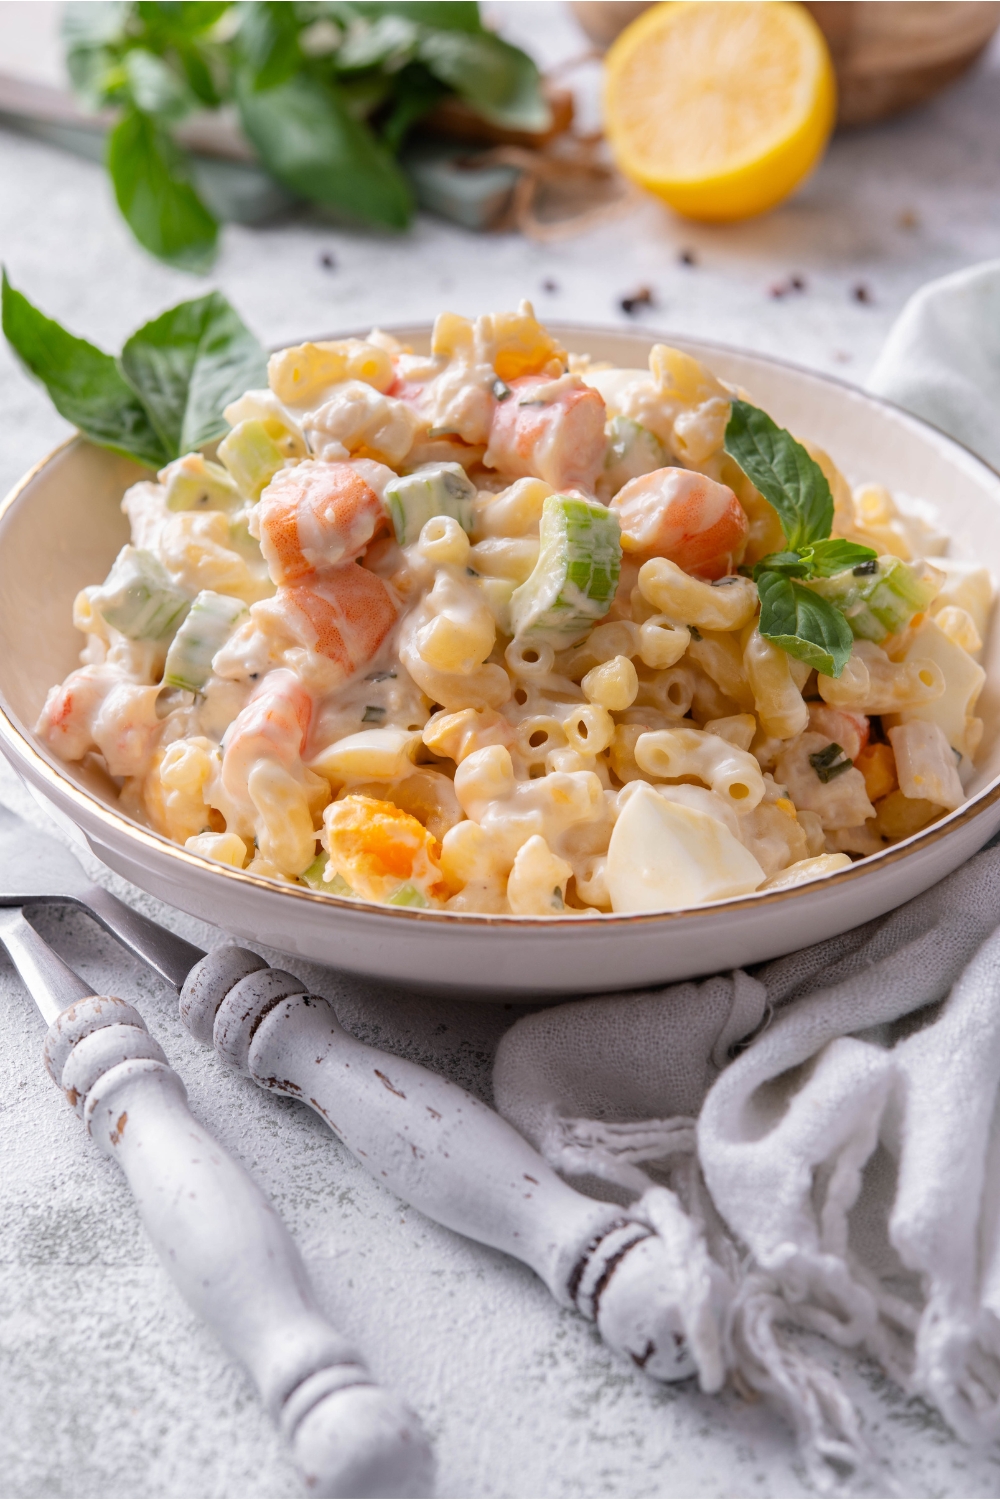 A bowl of seafood pasta salad with macaroni noodles, creamy dressing, and chunks of celery, hard-boiled eggs, and shrimp. The pasta salad is garnished with basil and two forks are next to the bowl.